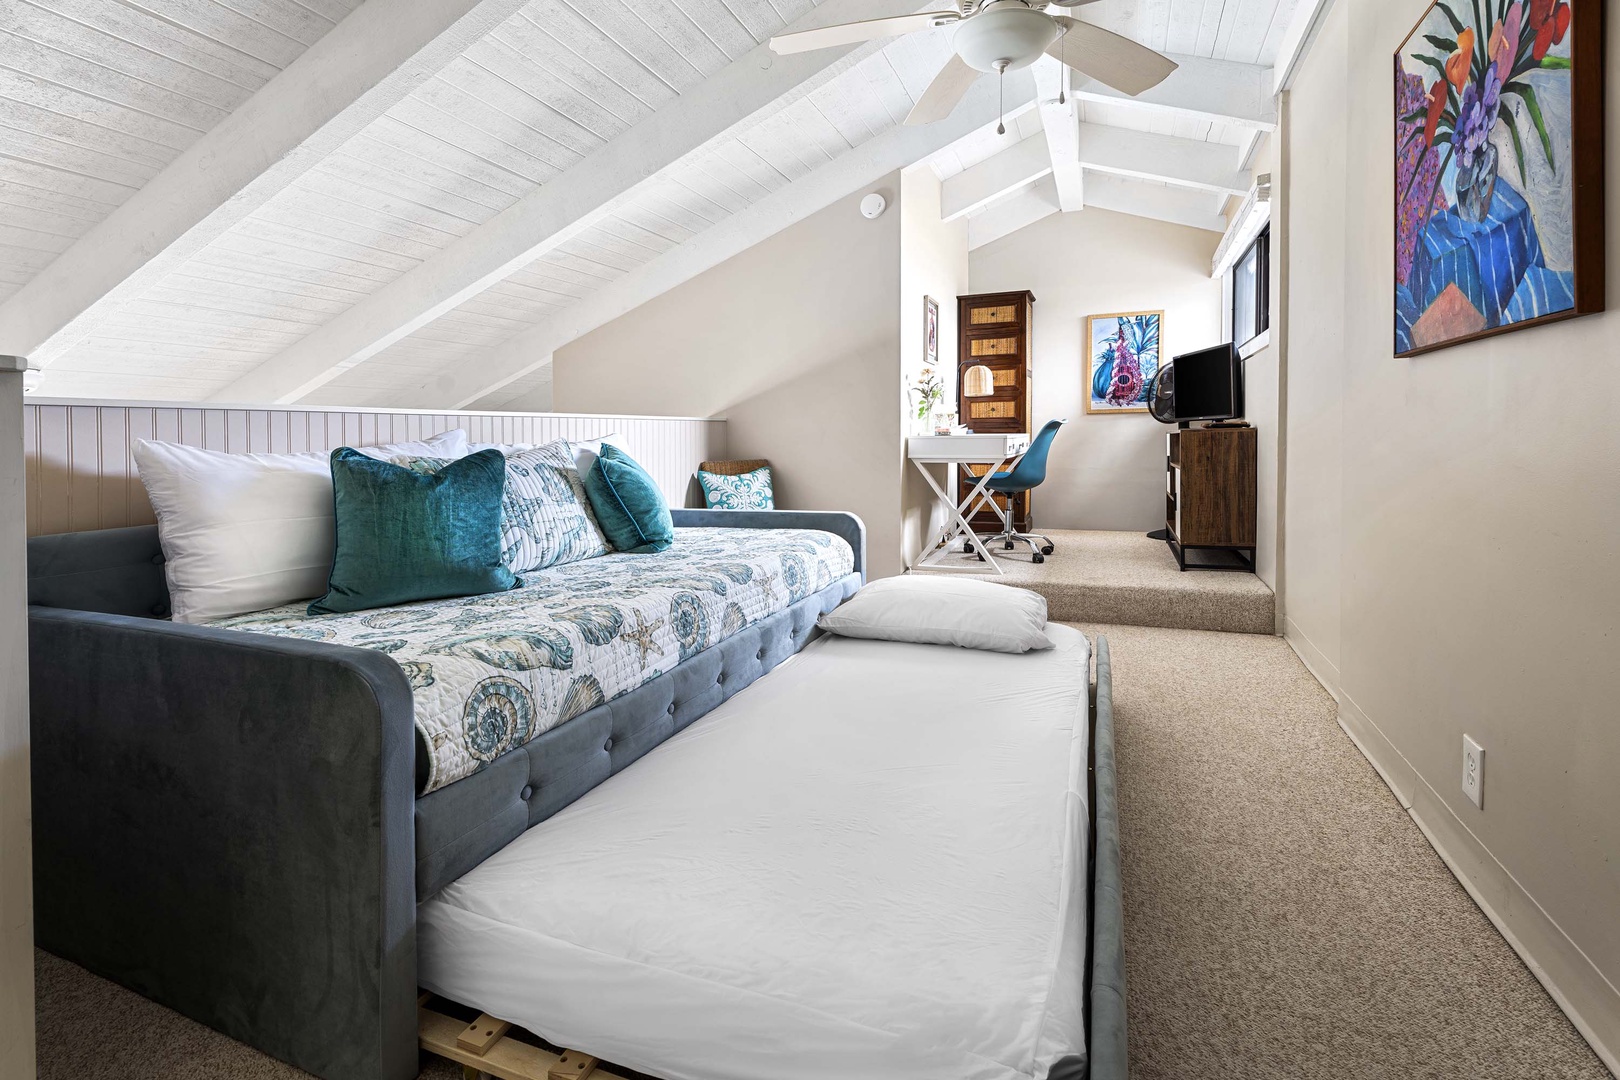 Kailua Kona Vacation Rentals, Kona Makai 6303 - Trundle bed, a cozy sleep solution upstairs offering comfort without compromising space.